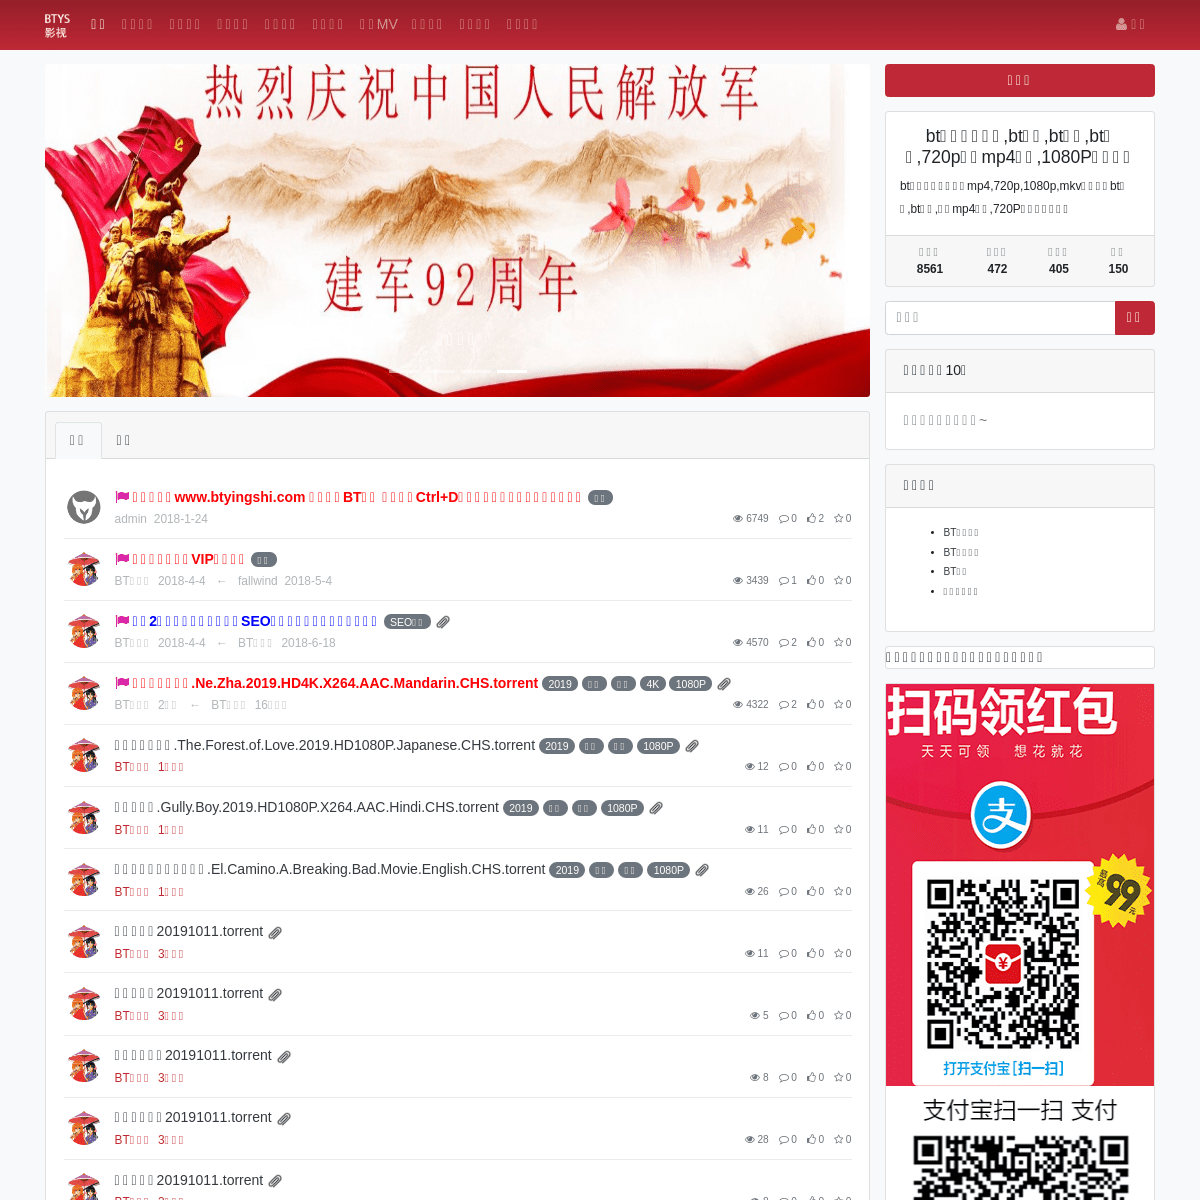 A complete backup of btyingshi.com